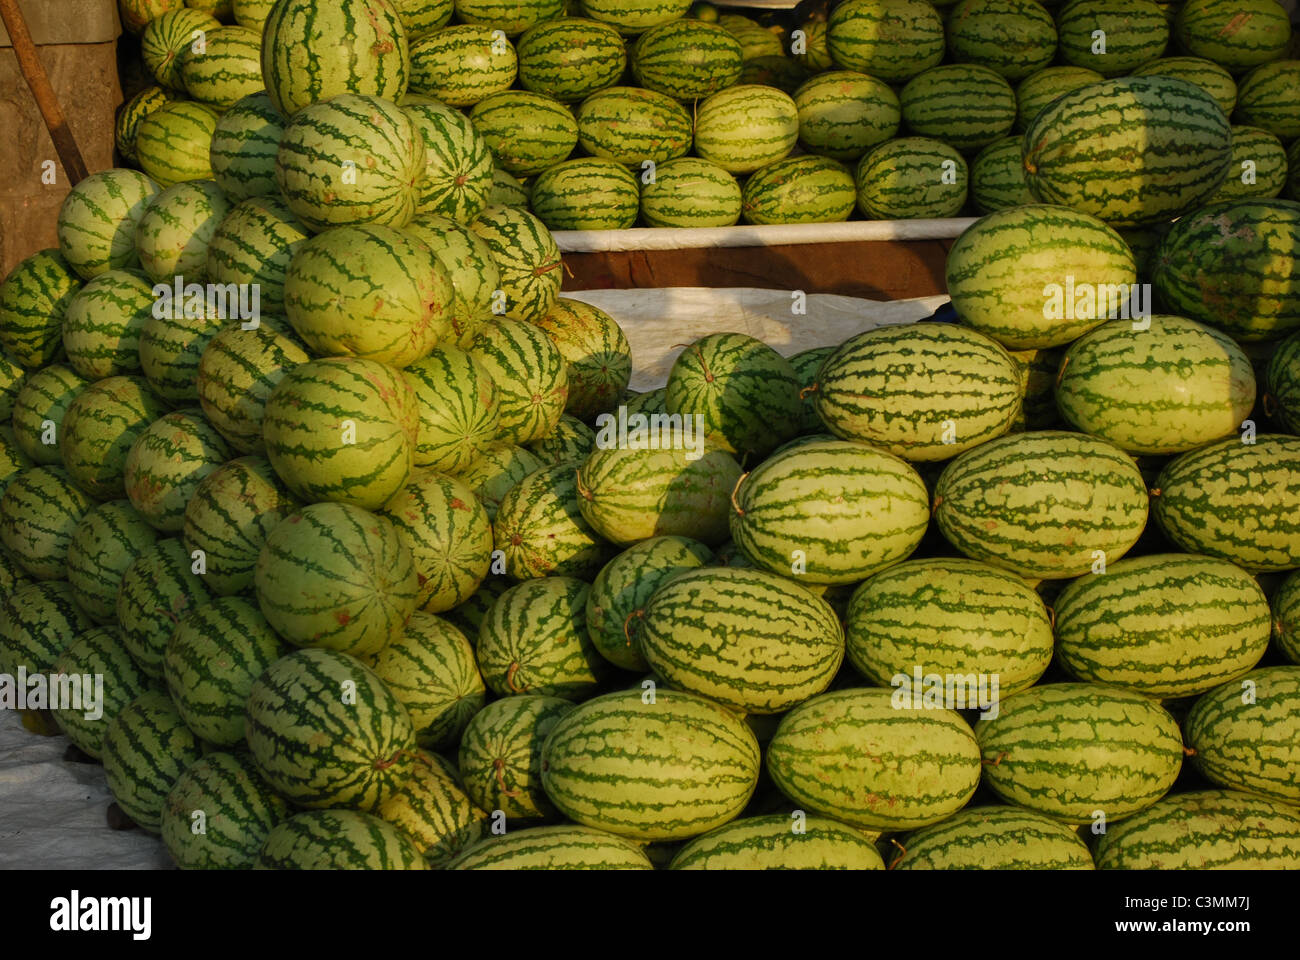 Water melon close-up Foto Stock